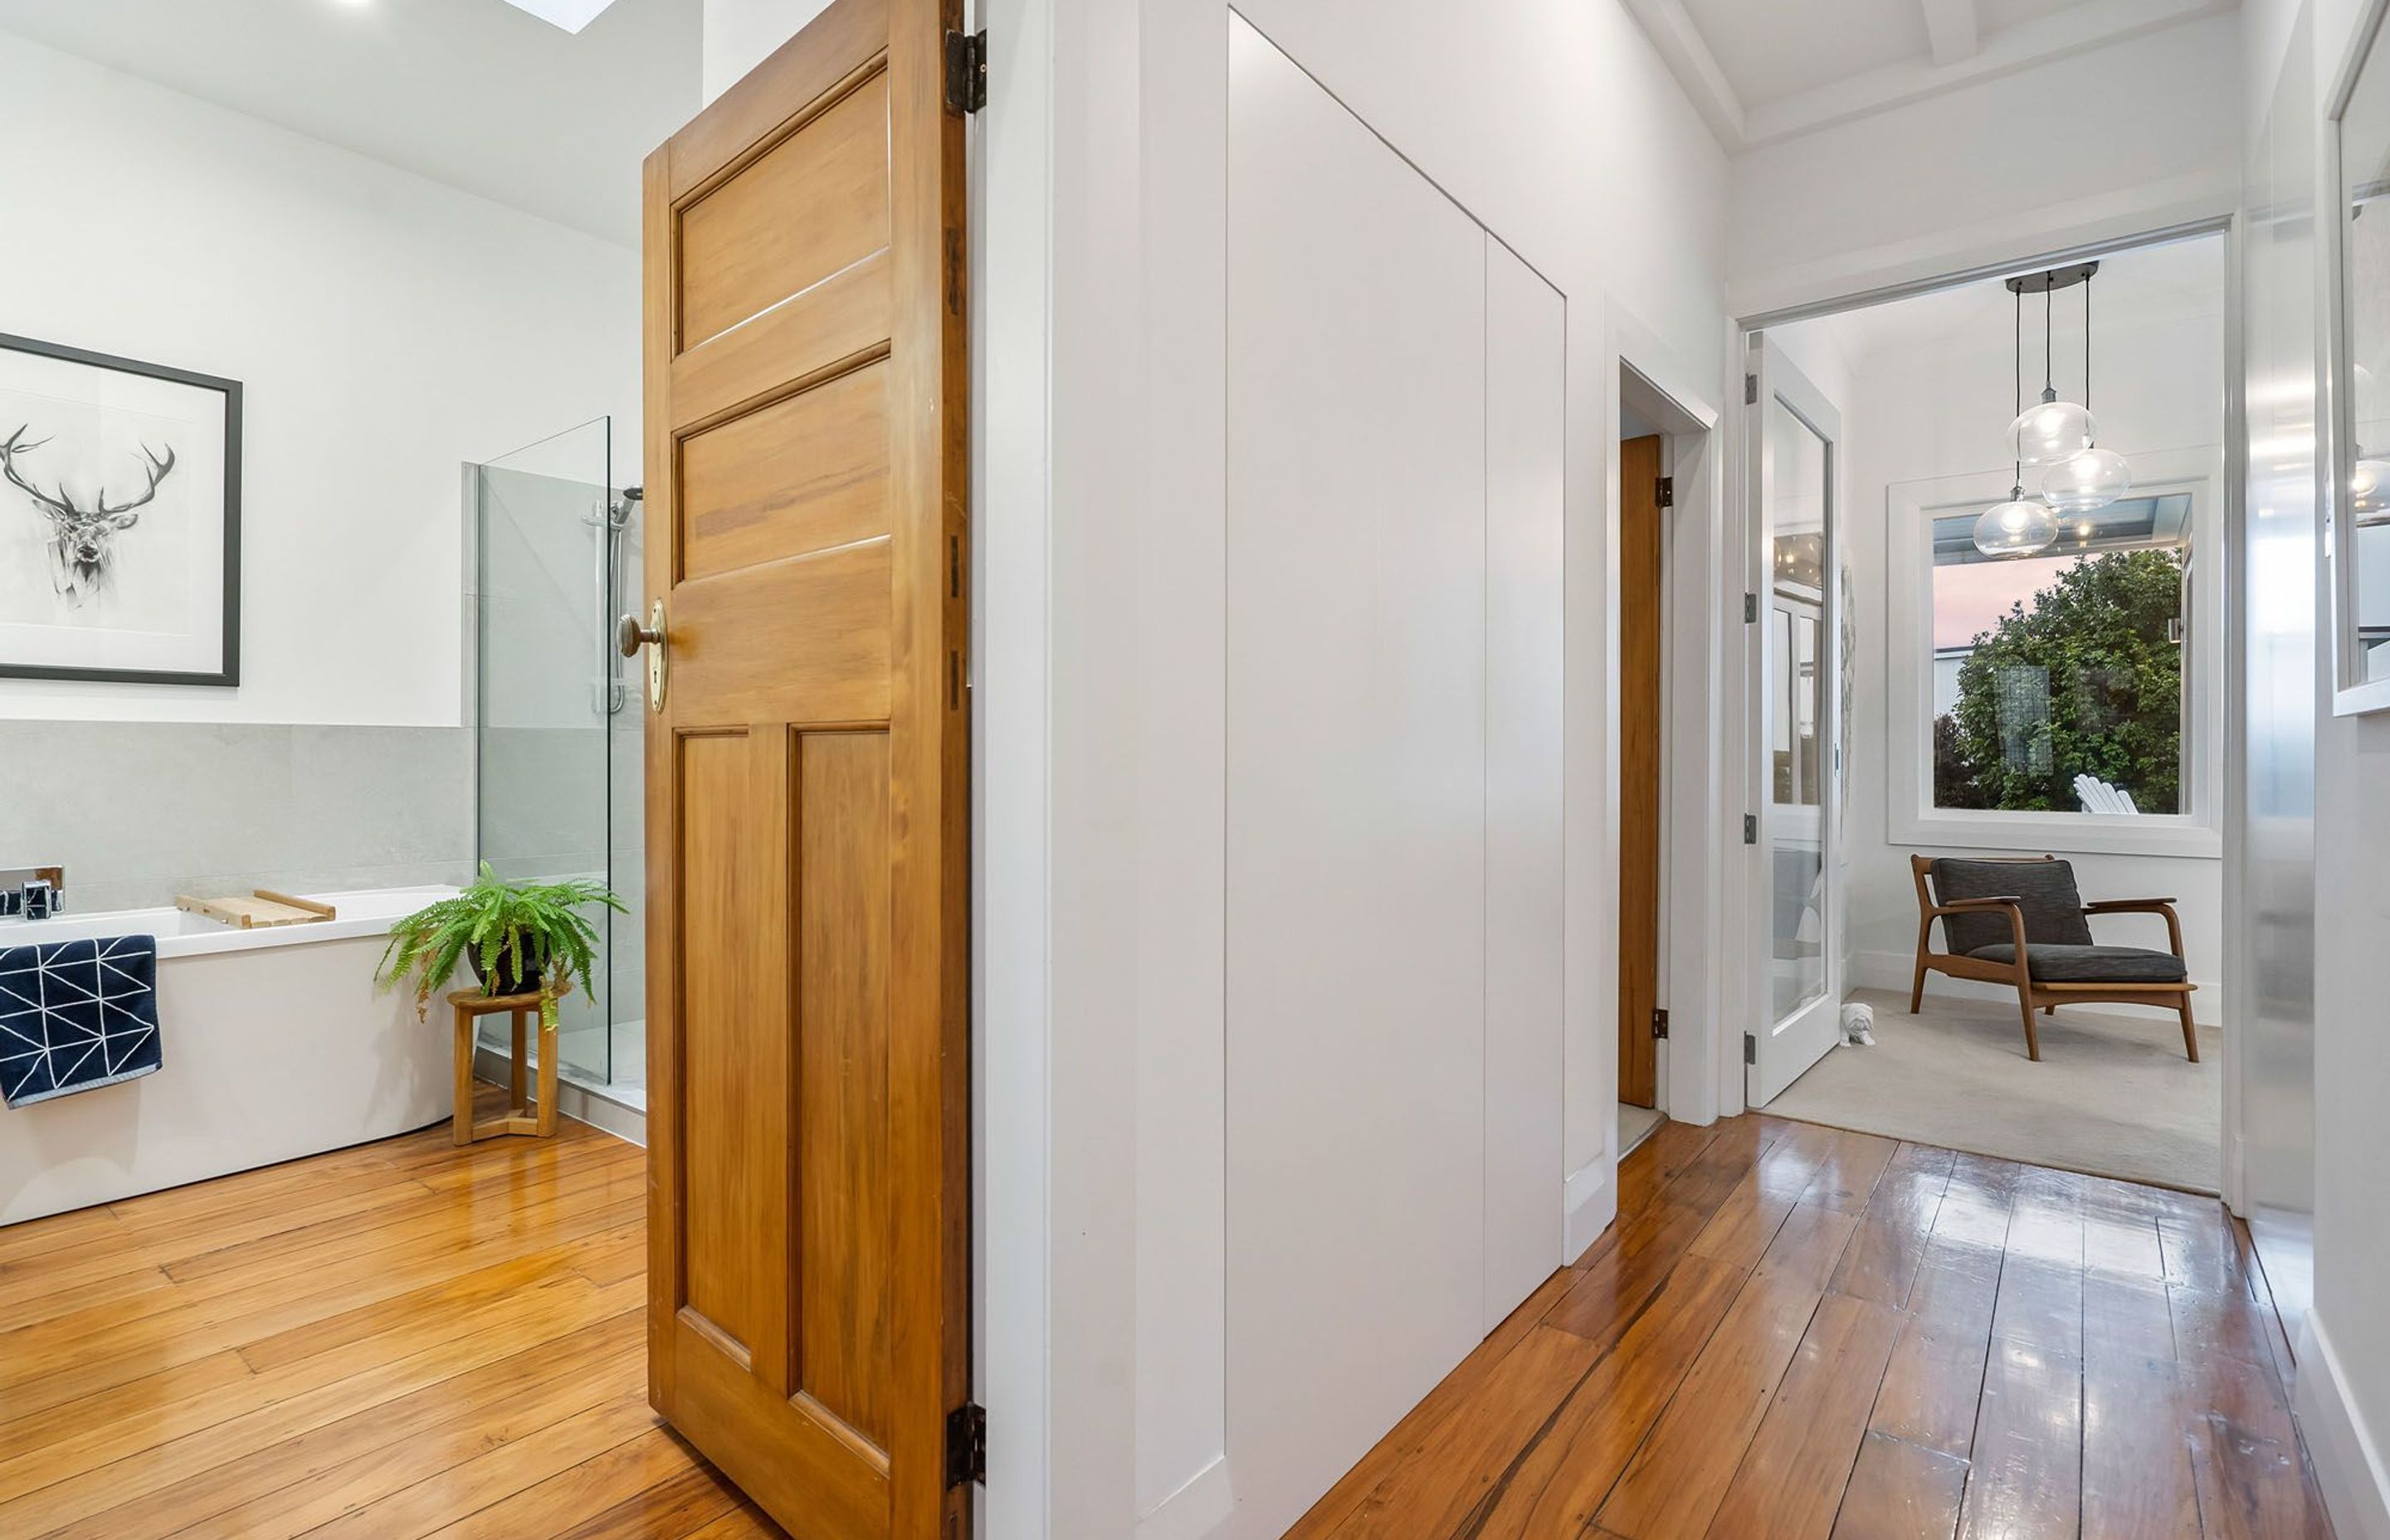 Part of the brief for the renovation was to increase the amount of storage but in an unobtrusive way. Flush-mounted doors without handles maintain the lines of the corridor without shouting 'cupboard'. All of the floorboards are reclaimed timbers and all 